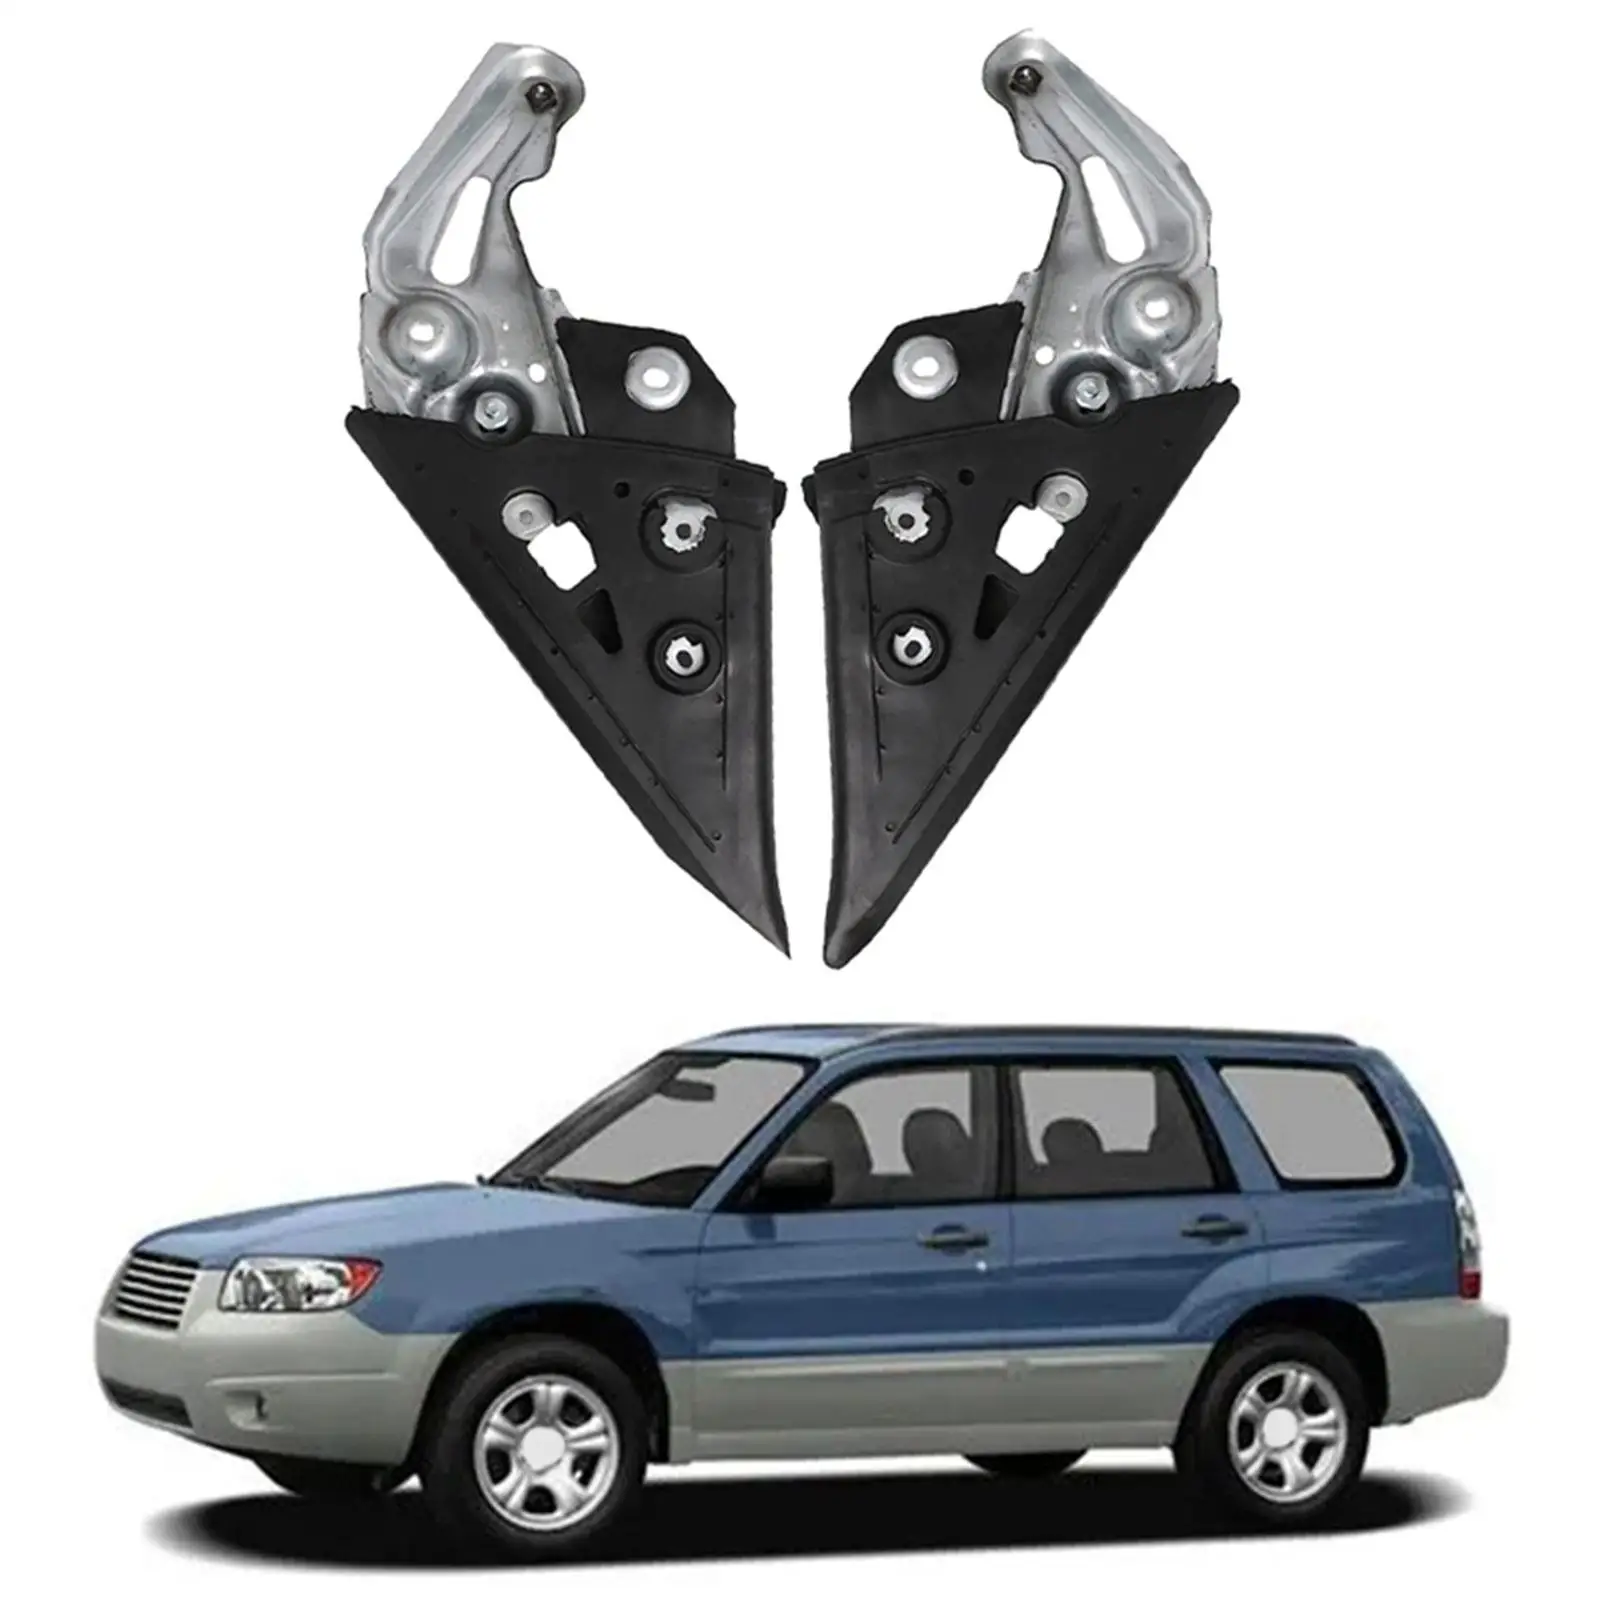 Auto Door Gusset Assembly Set 2 Pieces 61158SA000 61158SA010 for Forester 2003-2008 Refitting Replacement Parts